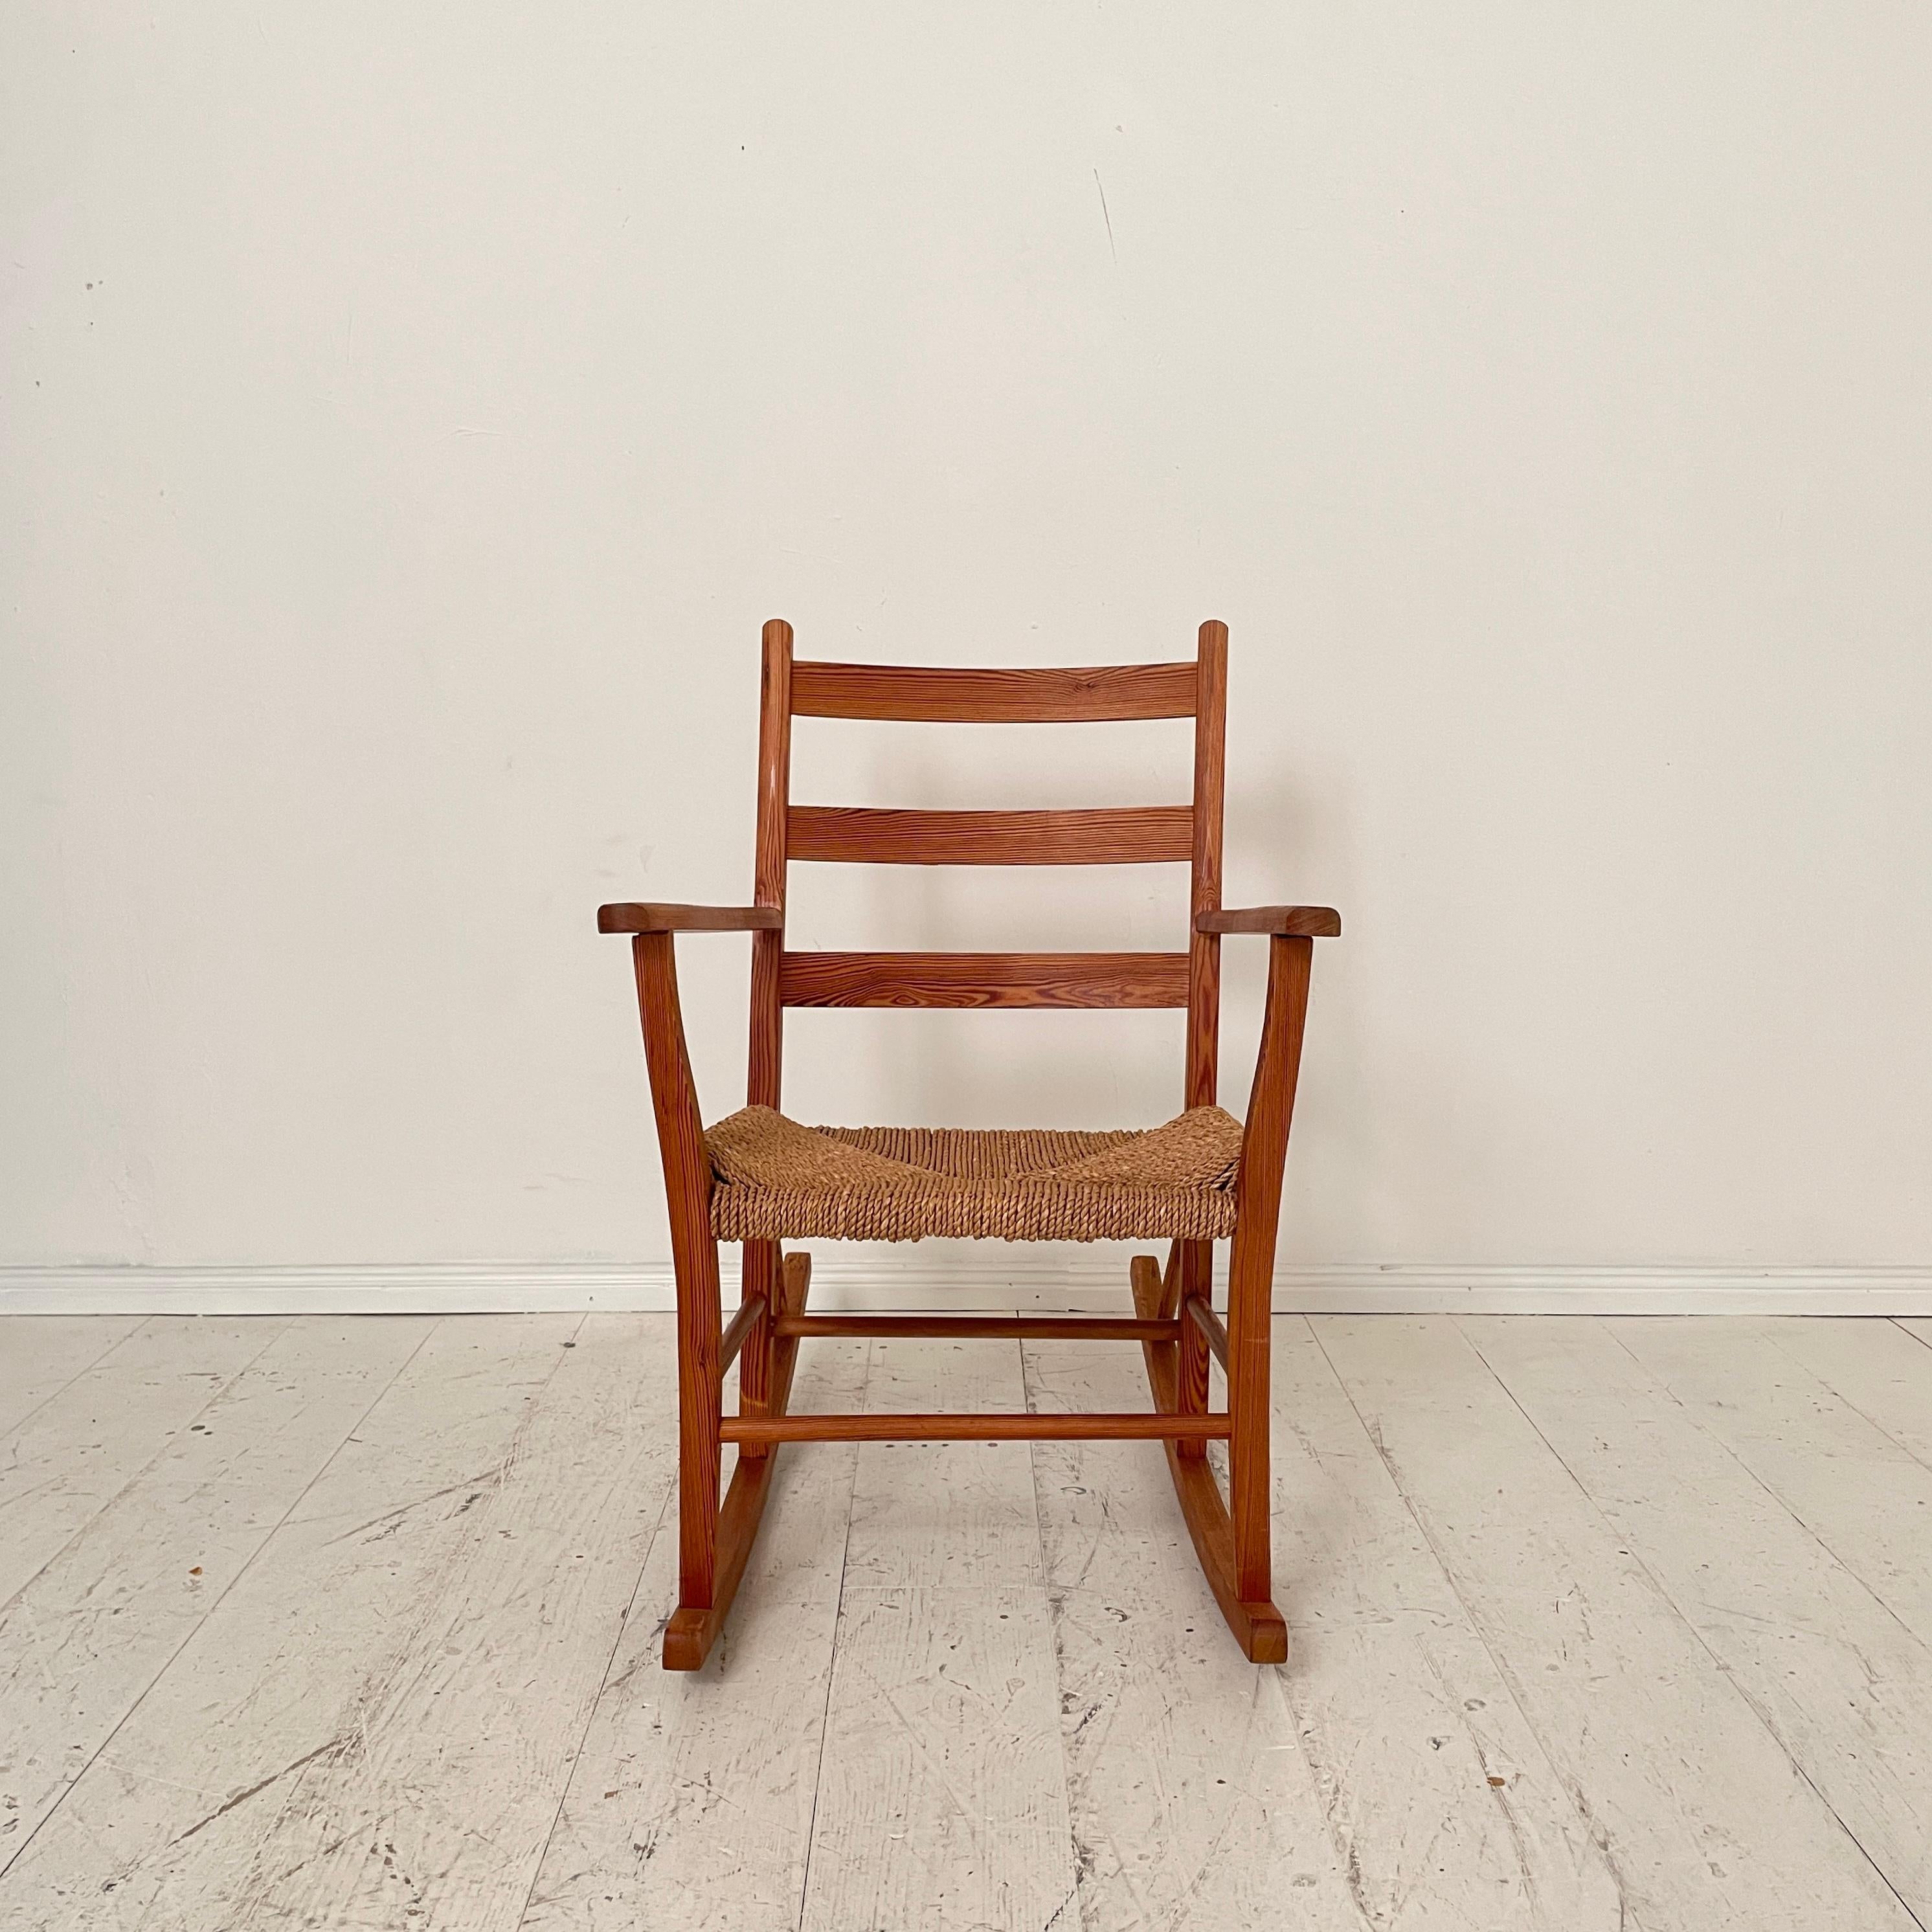 This beautiful and very comfortable Norwegian Rocking Chair was made and designed by Aksel Hansson in the 1930. The chair is made out of solid pine and the seat is made out of woven rope.
A unique piece which is a great eye-catcher for your antique,